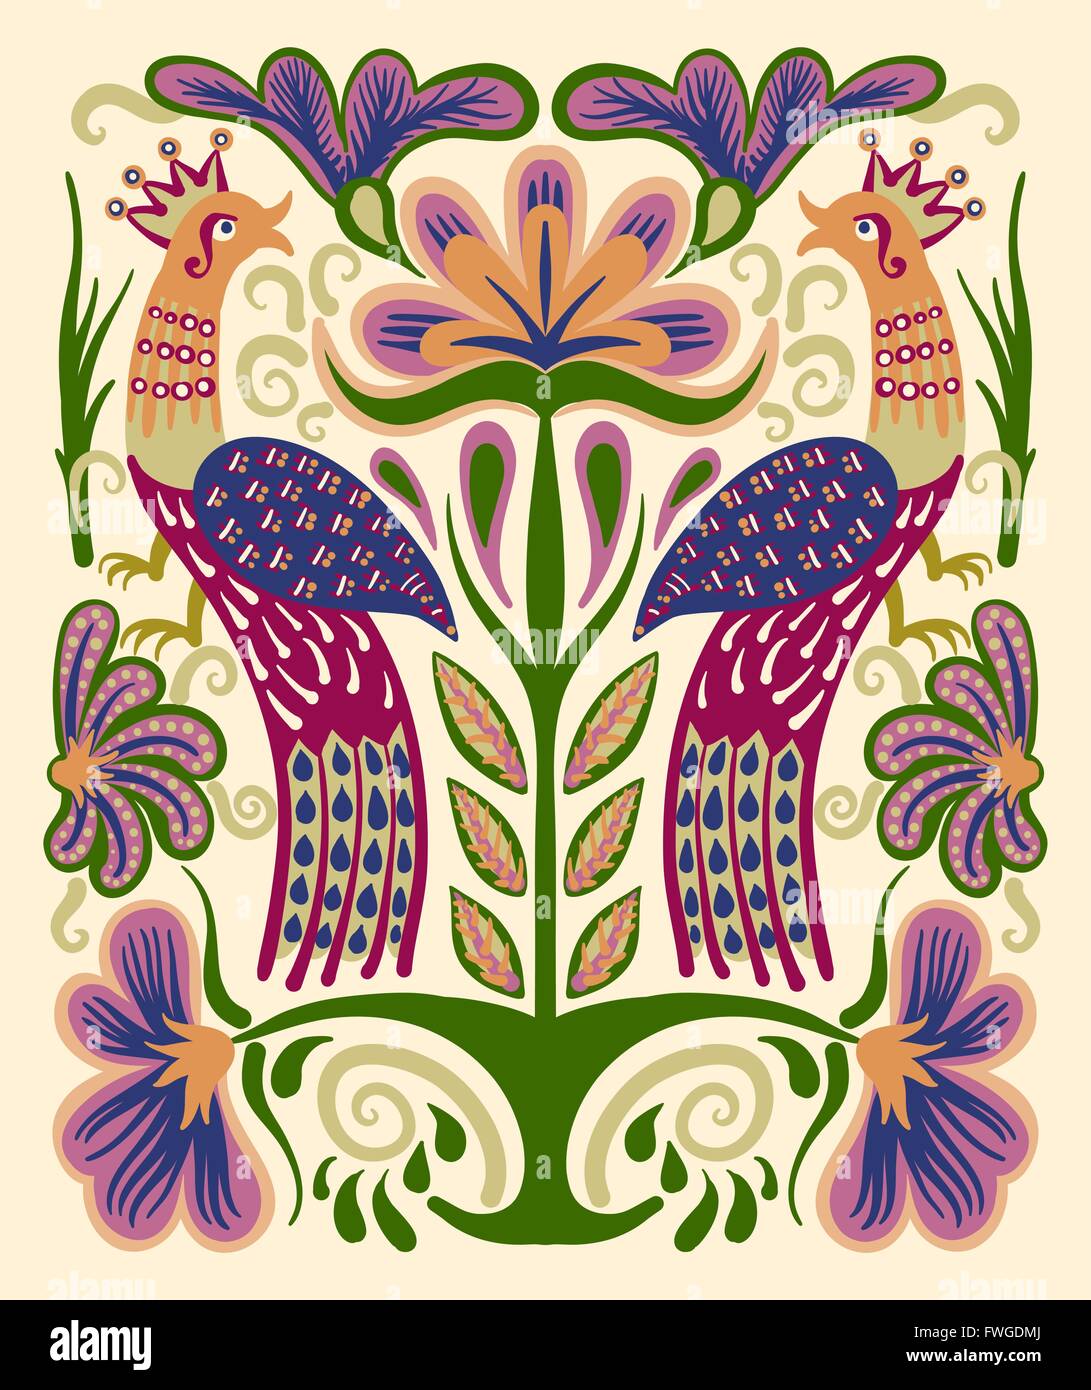 ukrainian hand drawn ethnic decorative pattern with two birds an Stock Vector